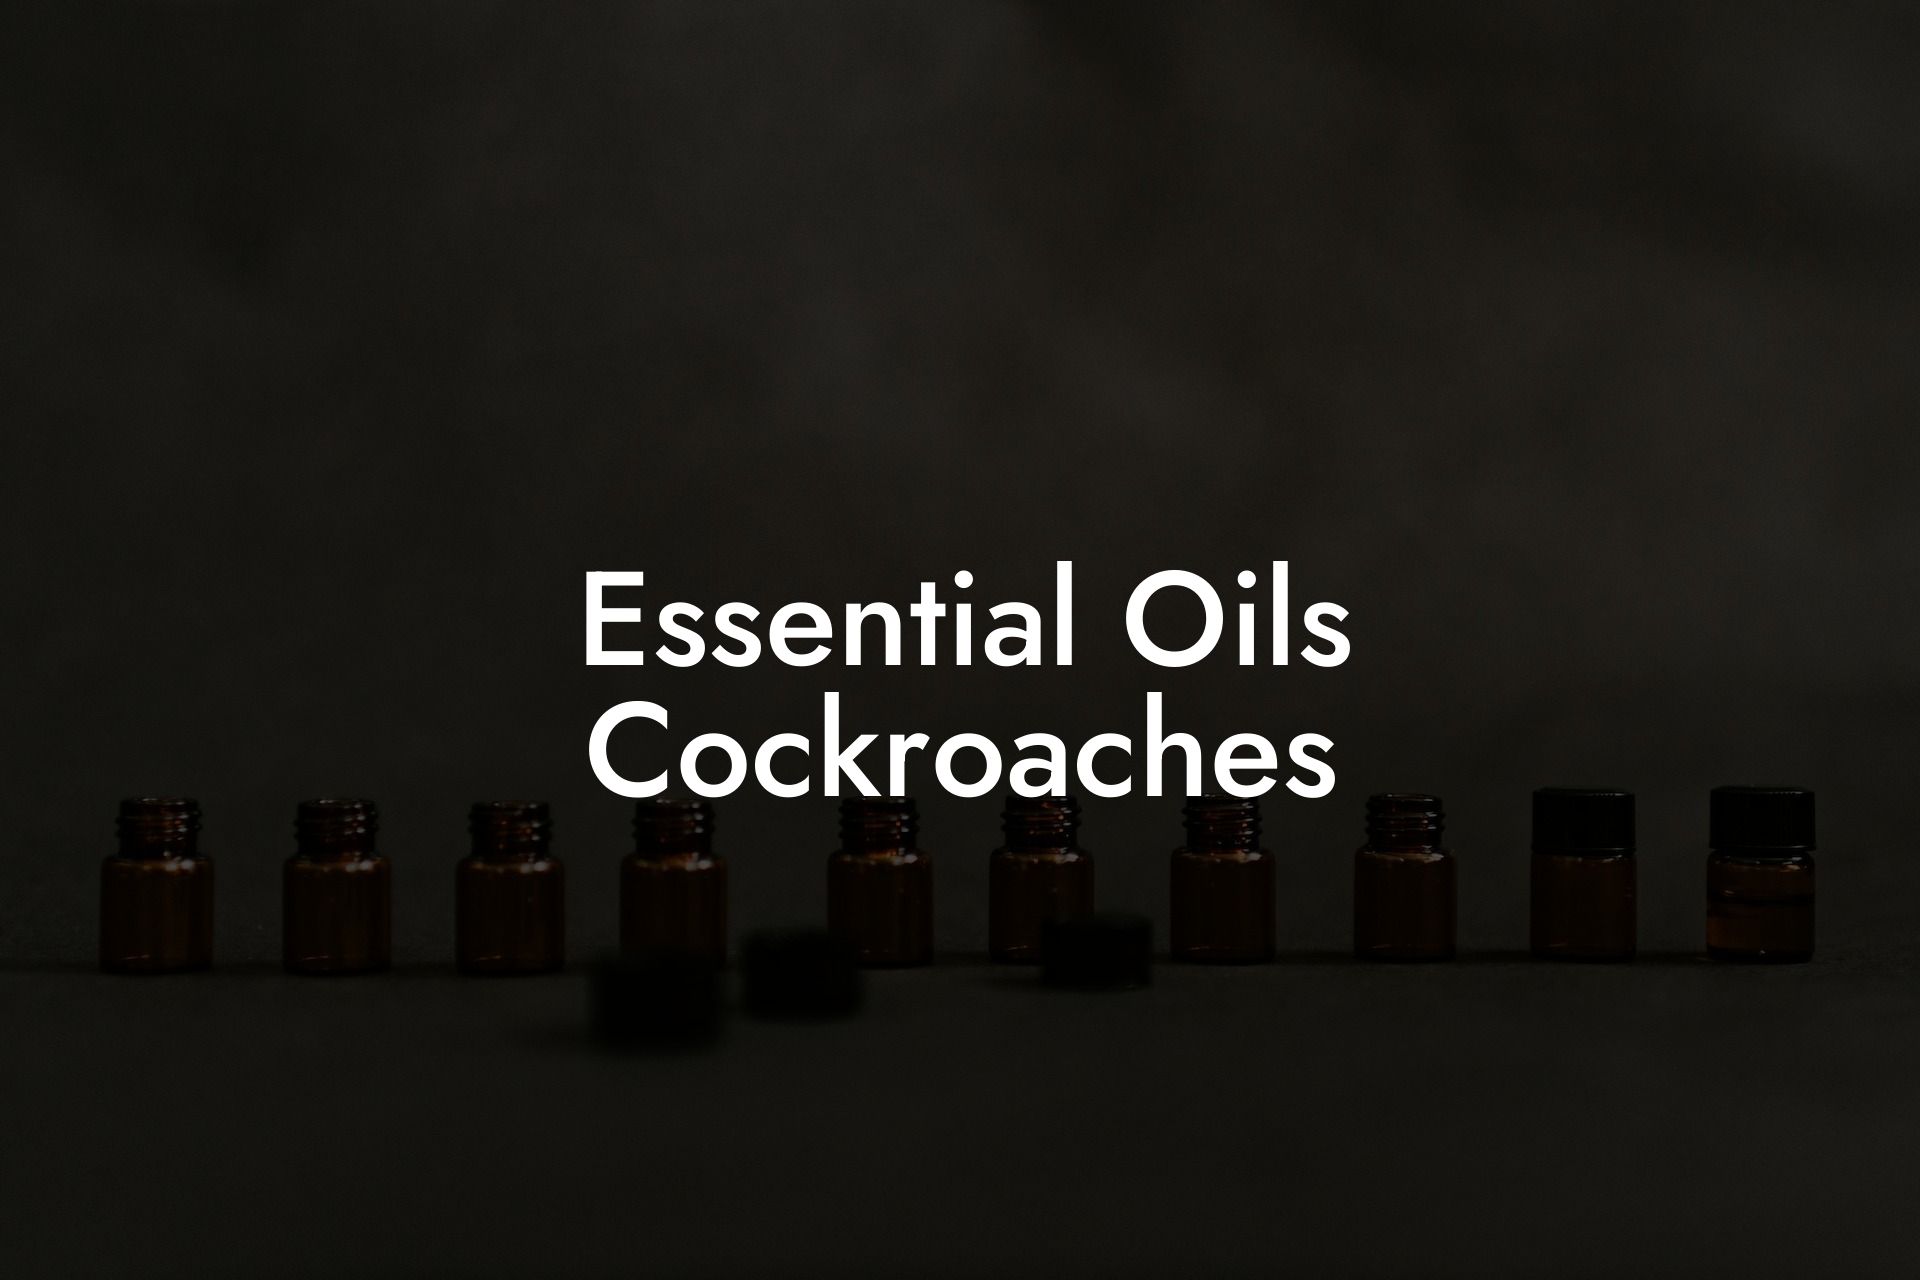 Essential Oils Cockroaches